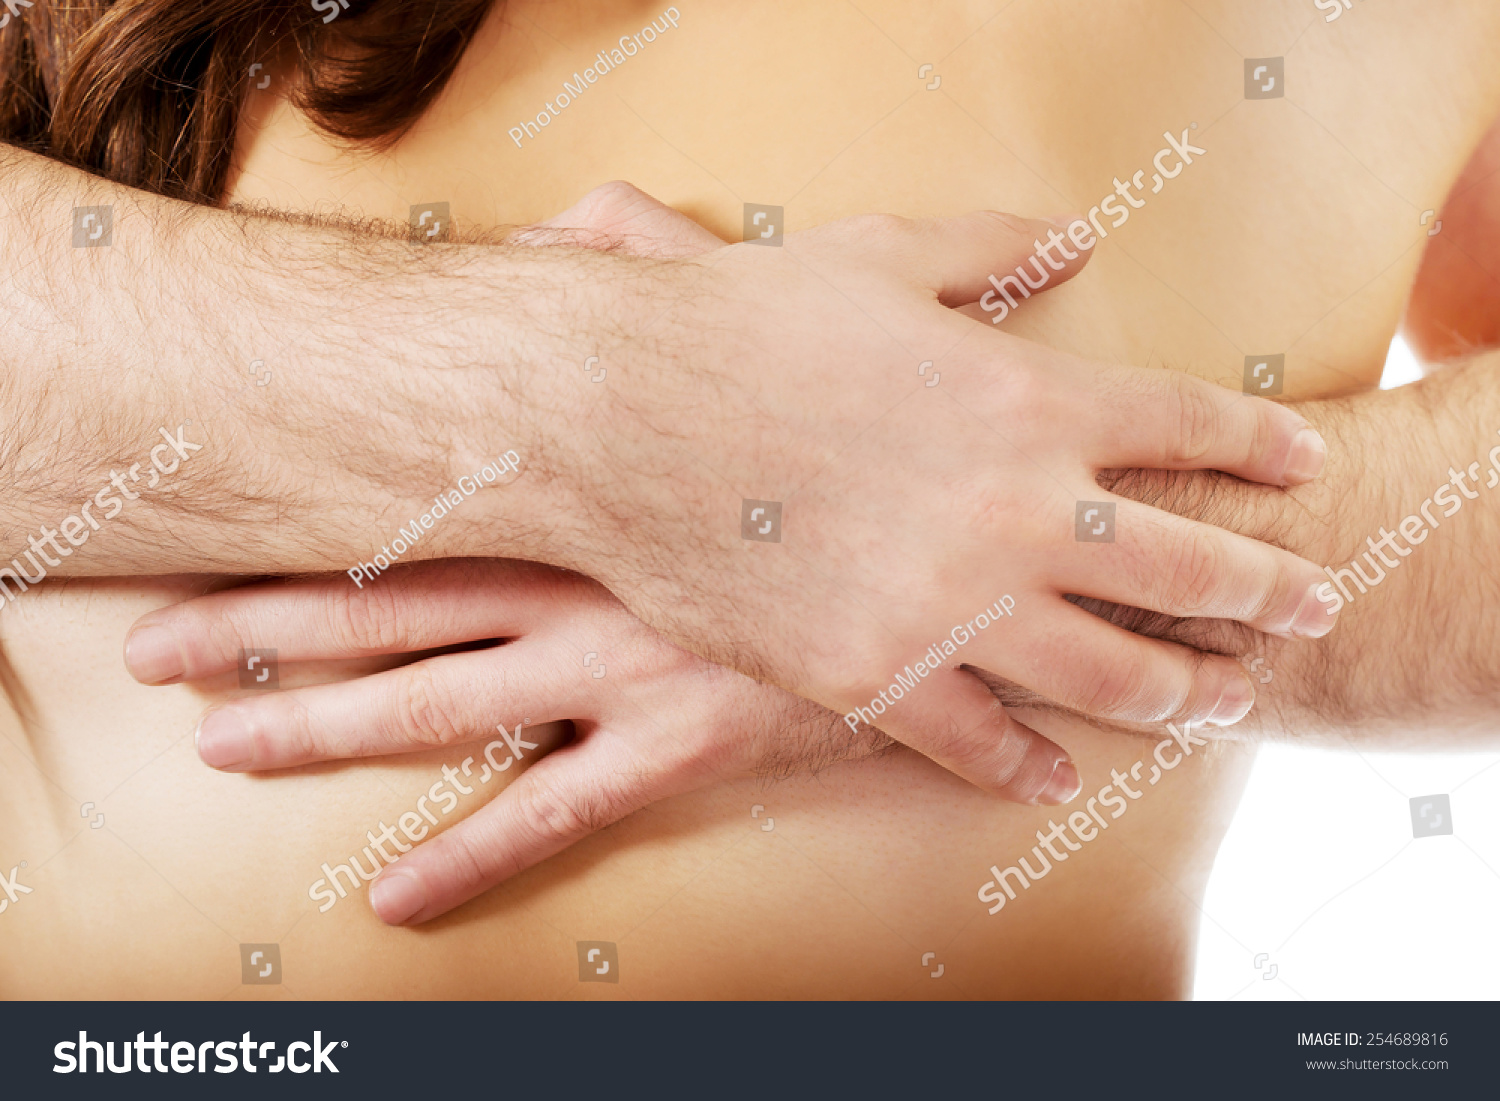 touching women s breast forcefully